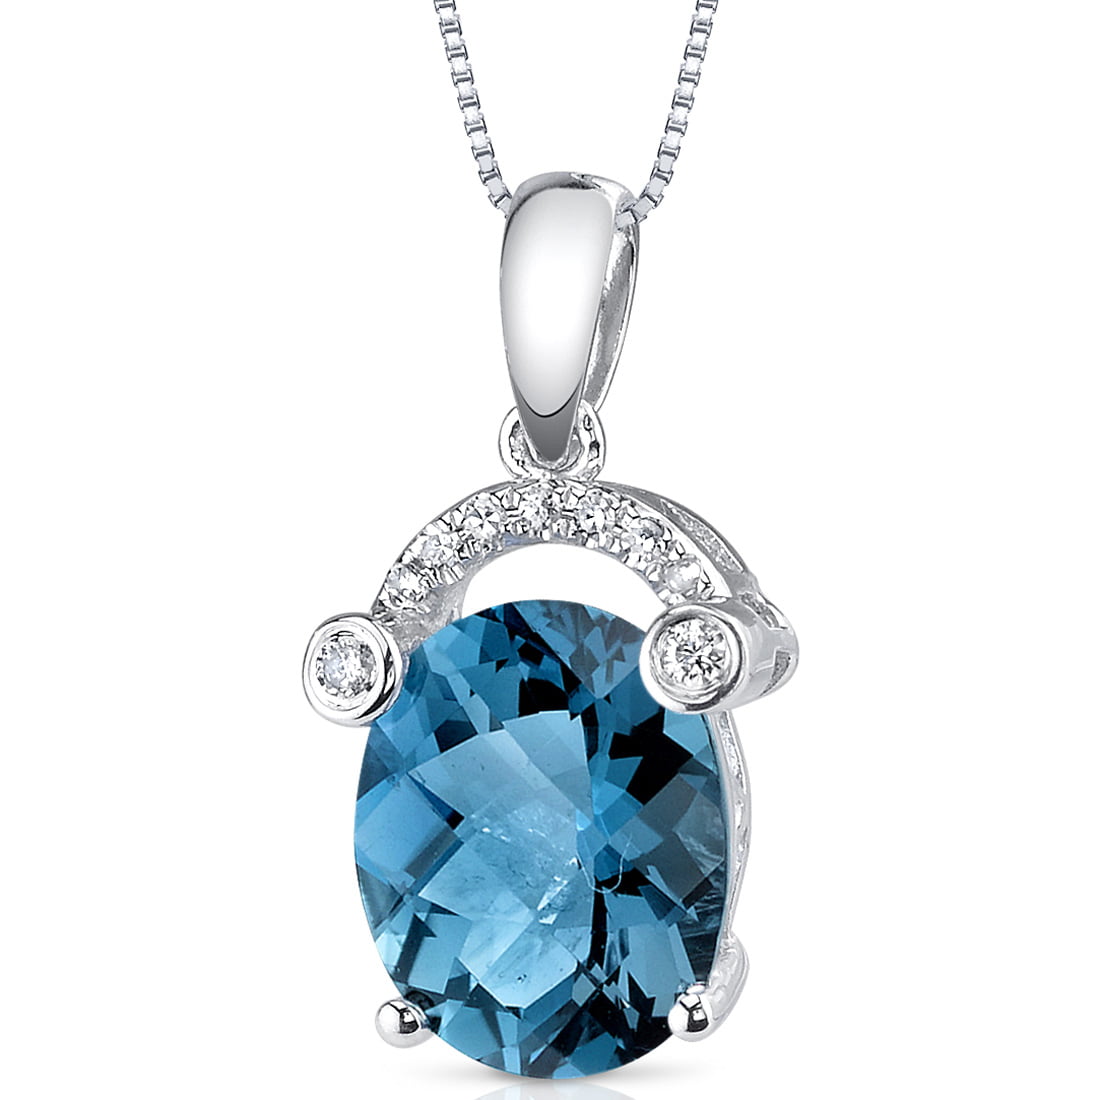 Beautiful White and yellow gold 14K Sterling Silver Rhodium w/14k Accent Blue Topaz & CZ Oval Pendant